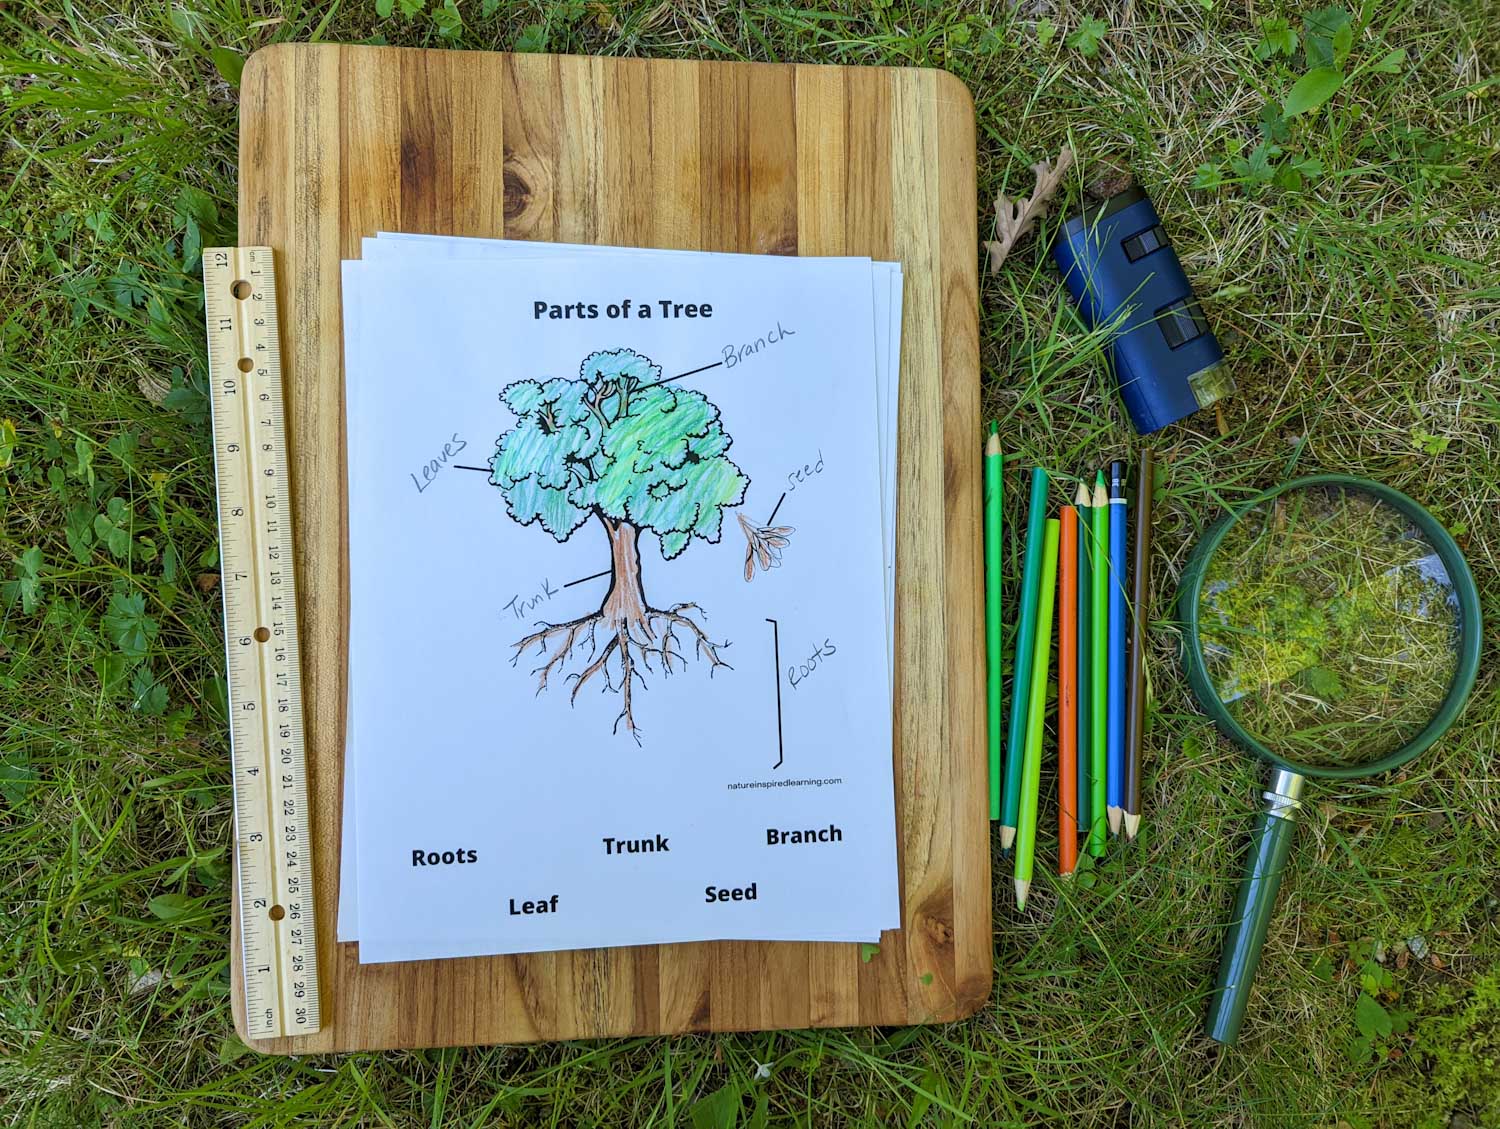 parts of a tree black and white worksheet colored in on a wooden cutting board outside in grass. Rule to the left and colored pencils, field microscope, and magnifying lens on grass to the right of the printable